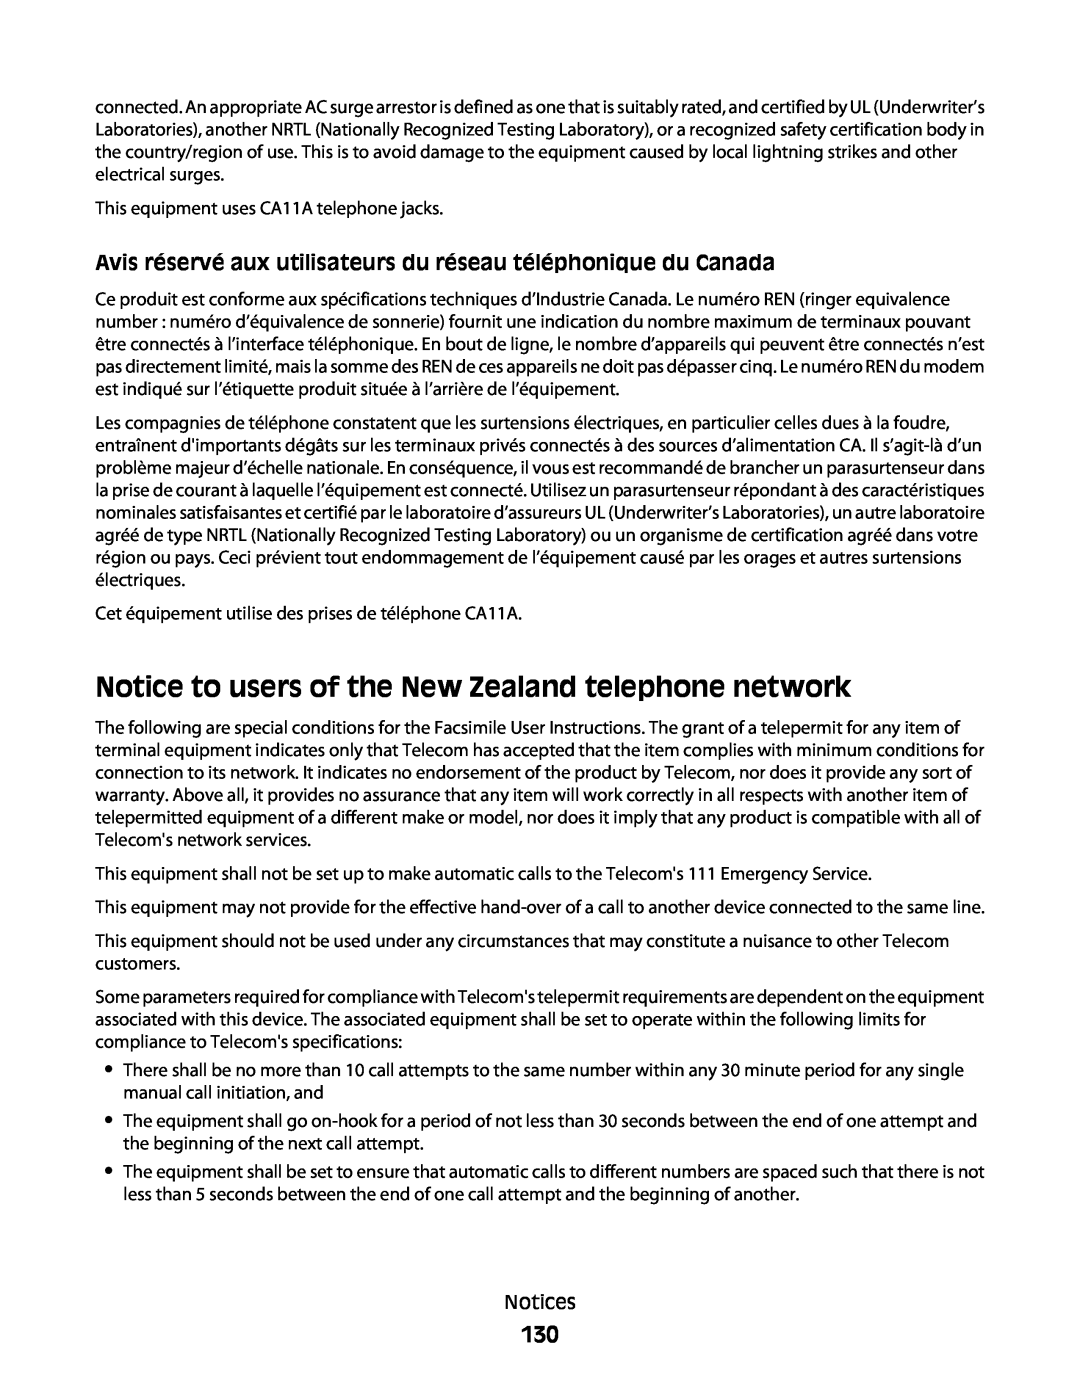 Lexmark 30E, S500, 301 manual Notice to users of the New Zealand telephone network 